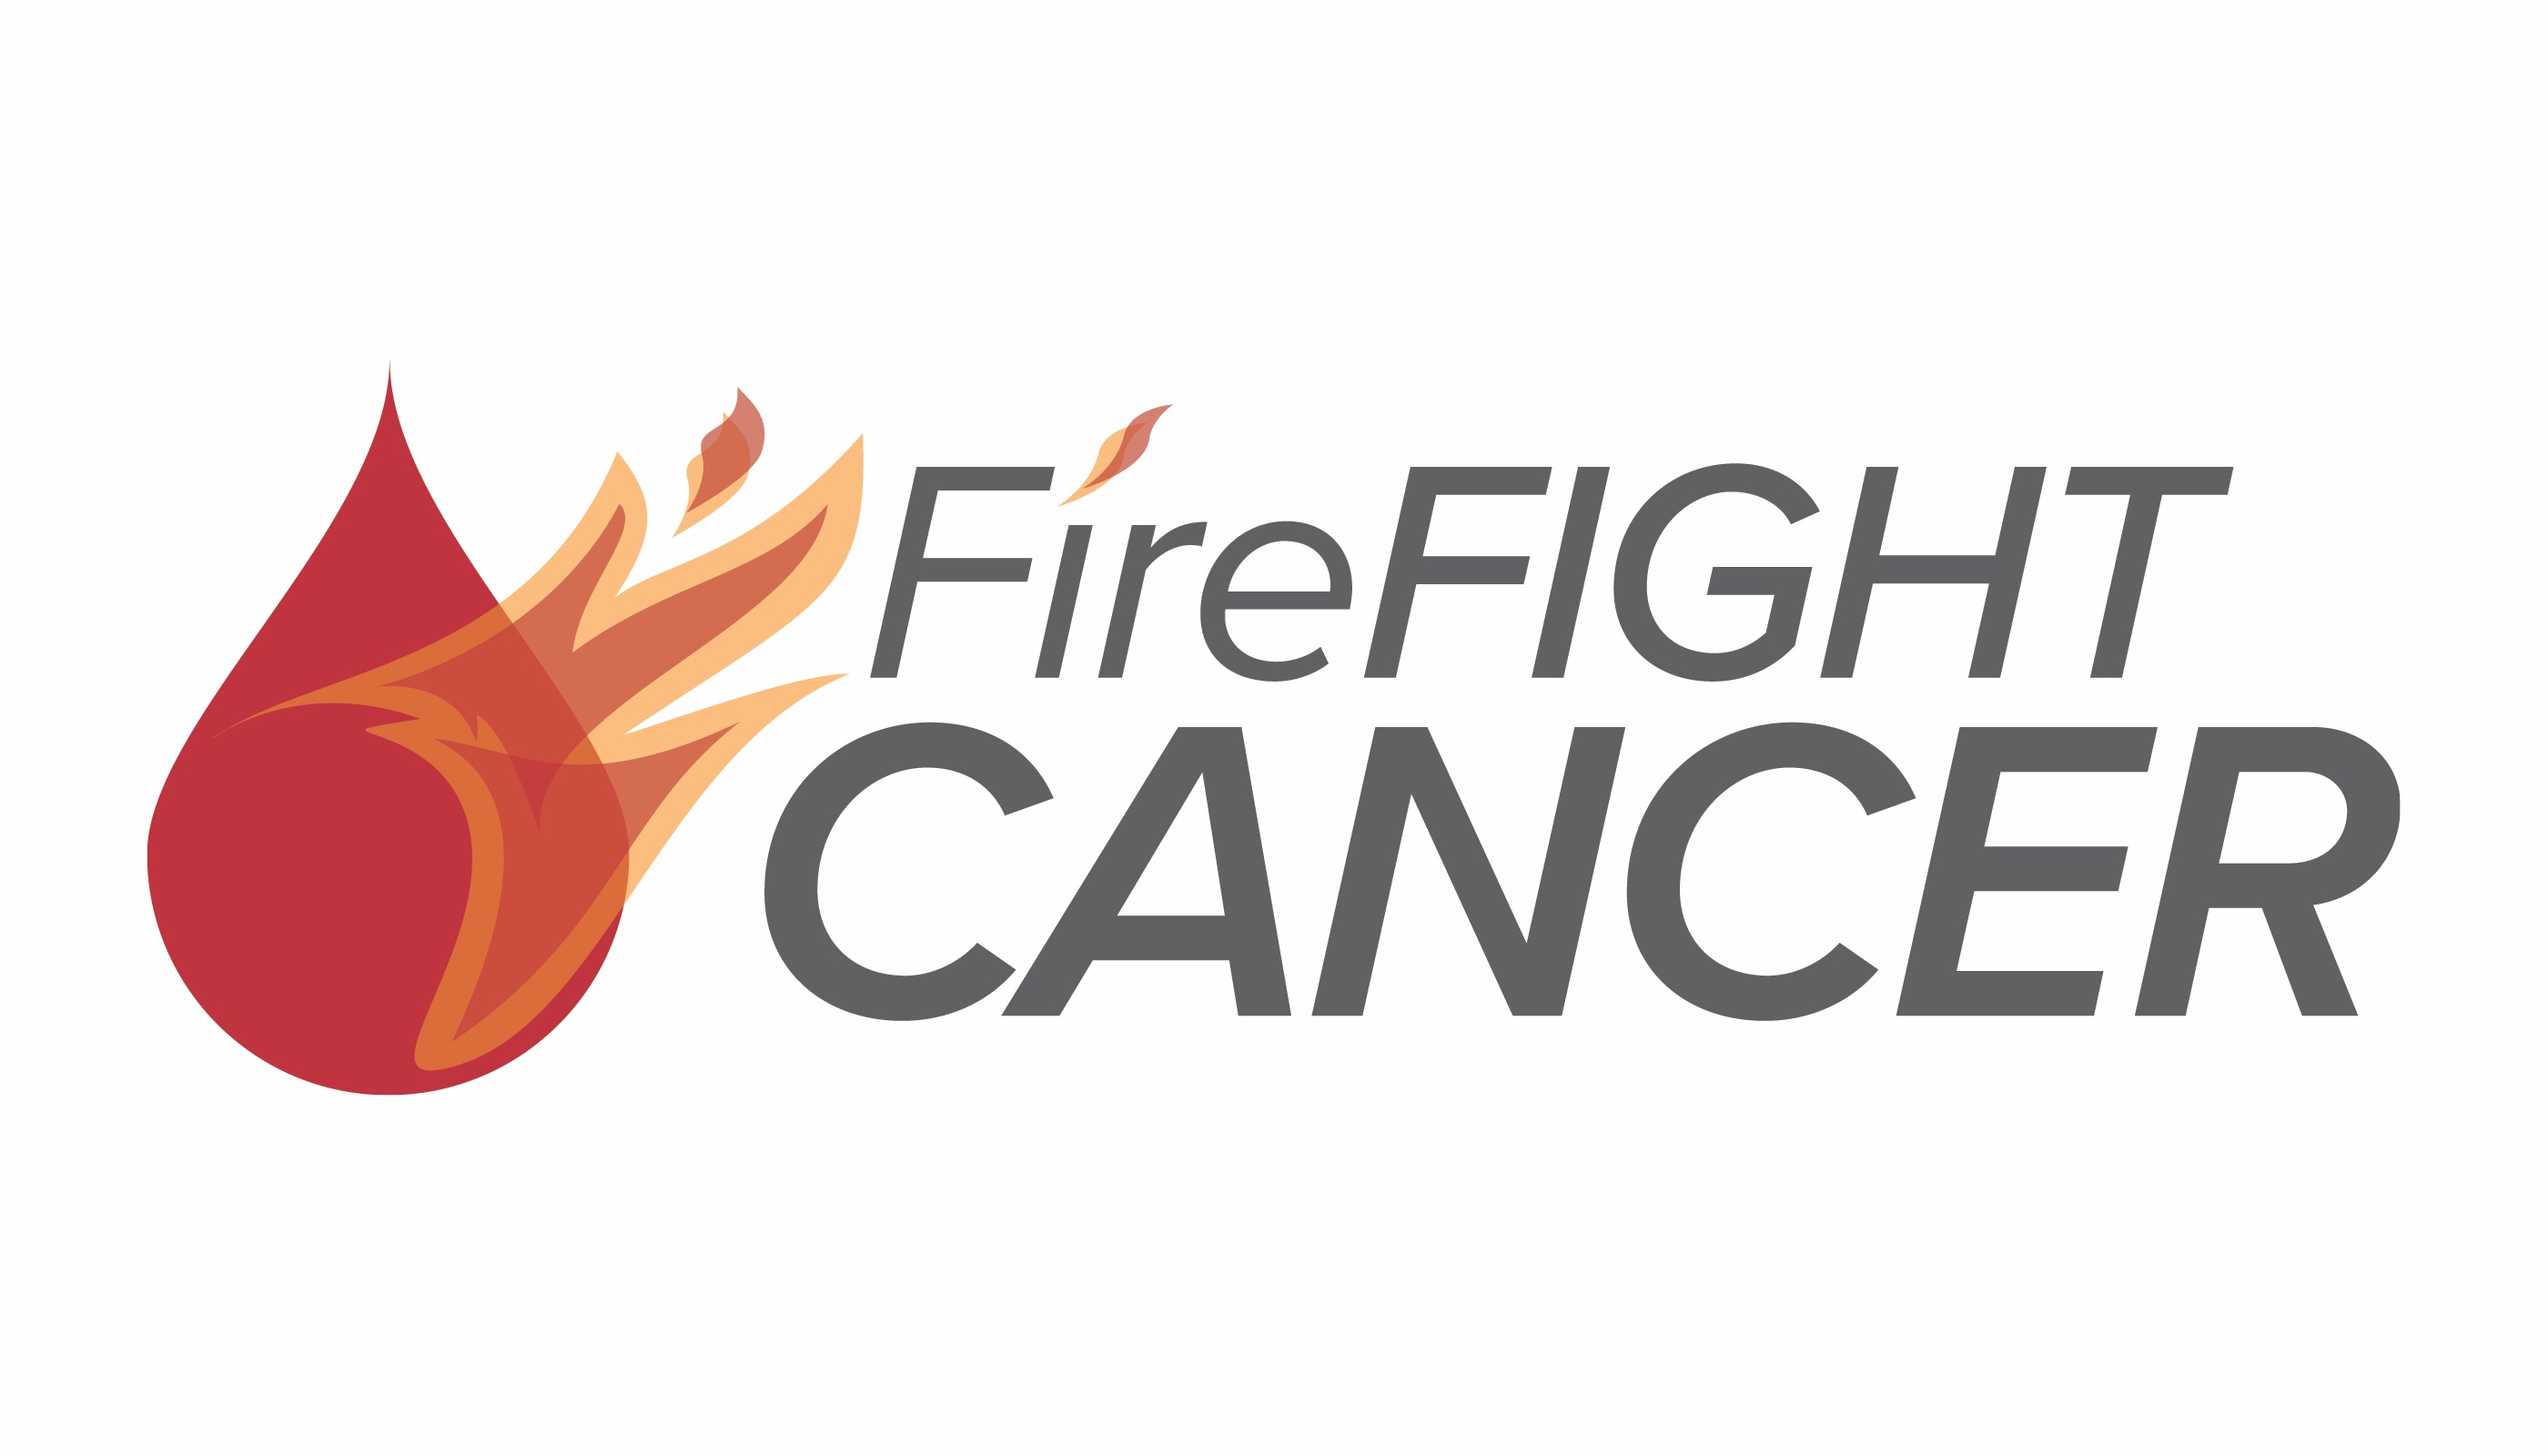 FireFIGHT CANCER!